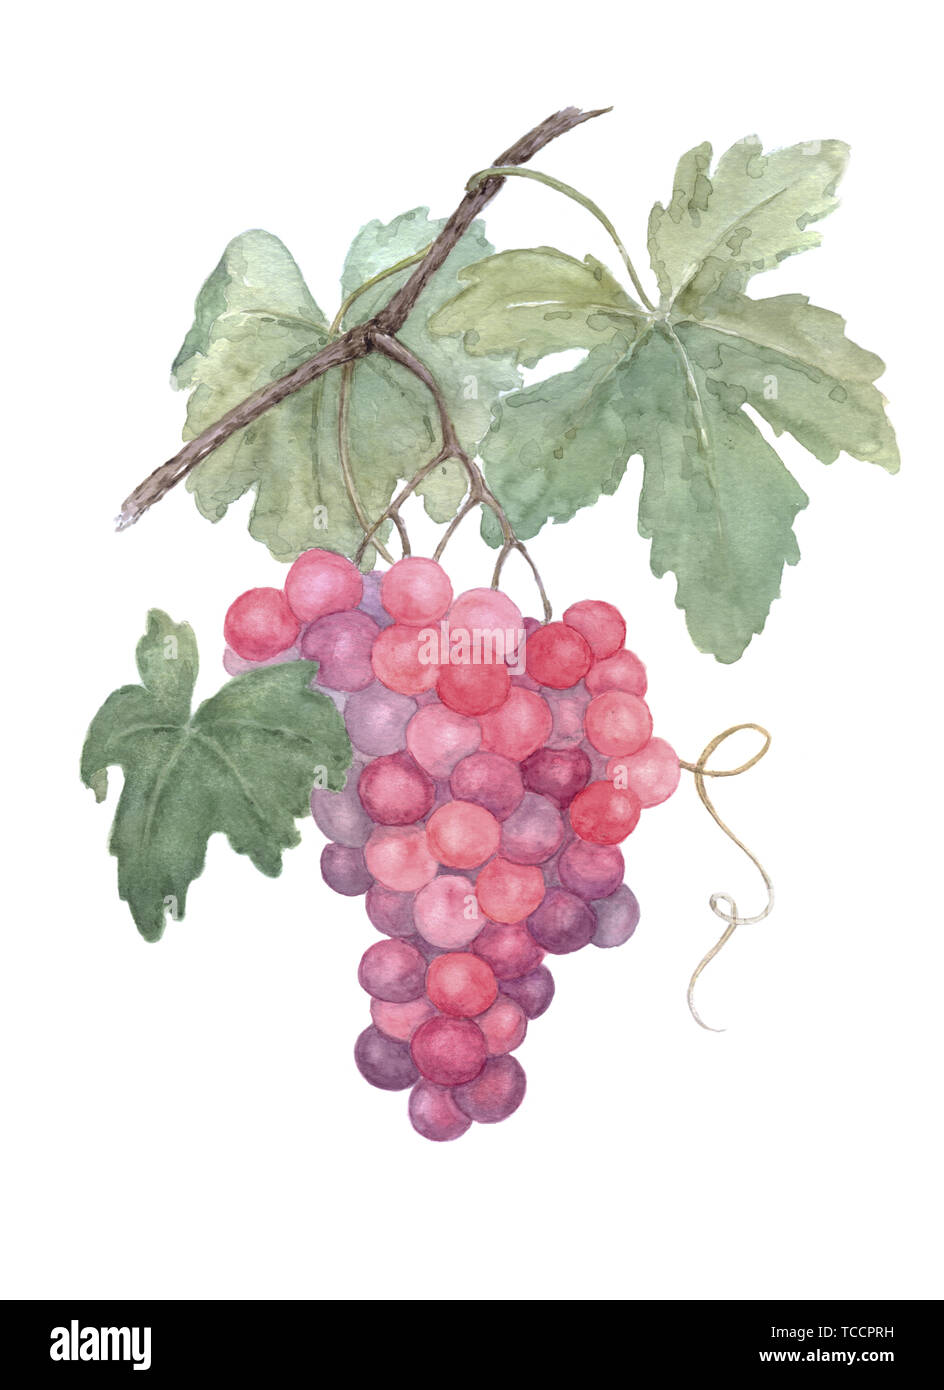 Grapes on branch watercolor painting on white background. Great for farming, gardening, grocery, juice, wine labels. Can be used separately for decora Stock Photo